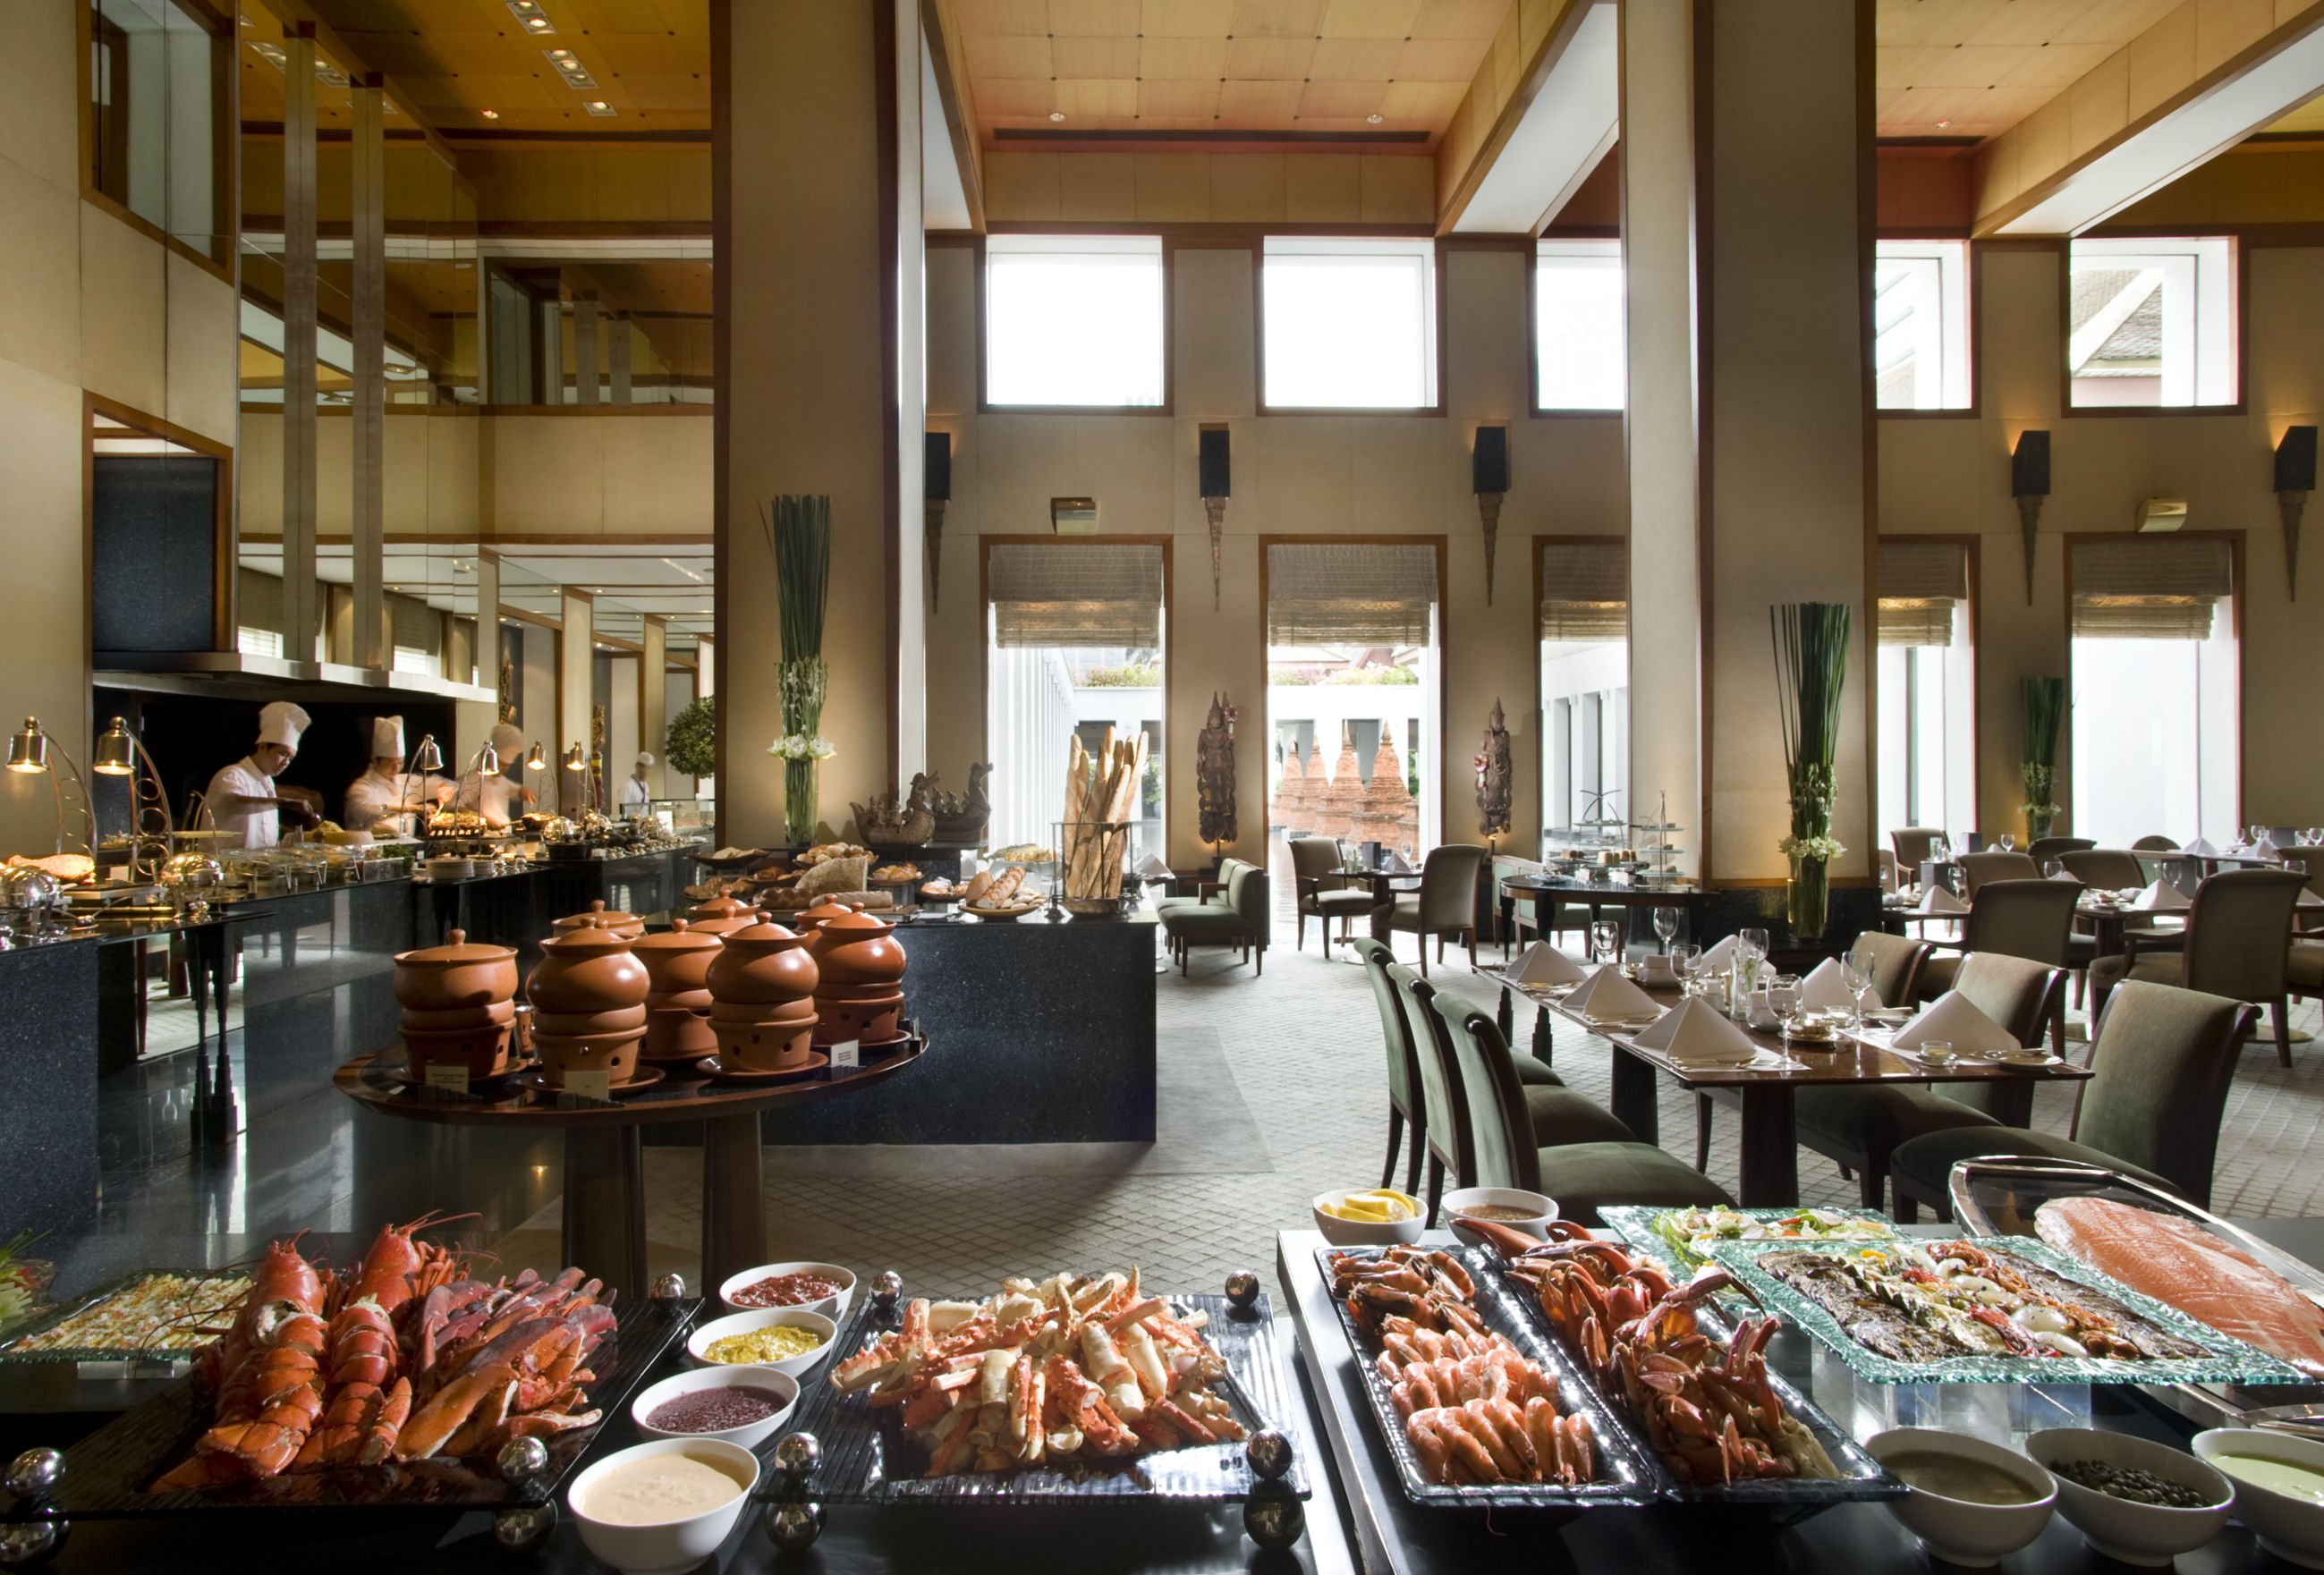 Giveaway: Win Sunday brunch for two at The Sukhothai Bangkok